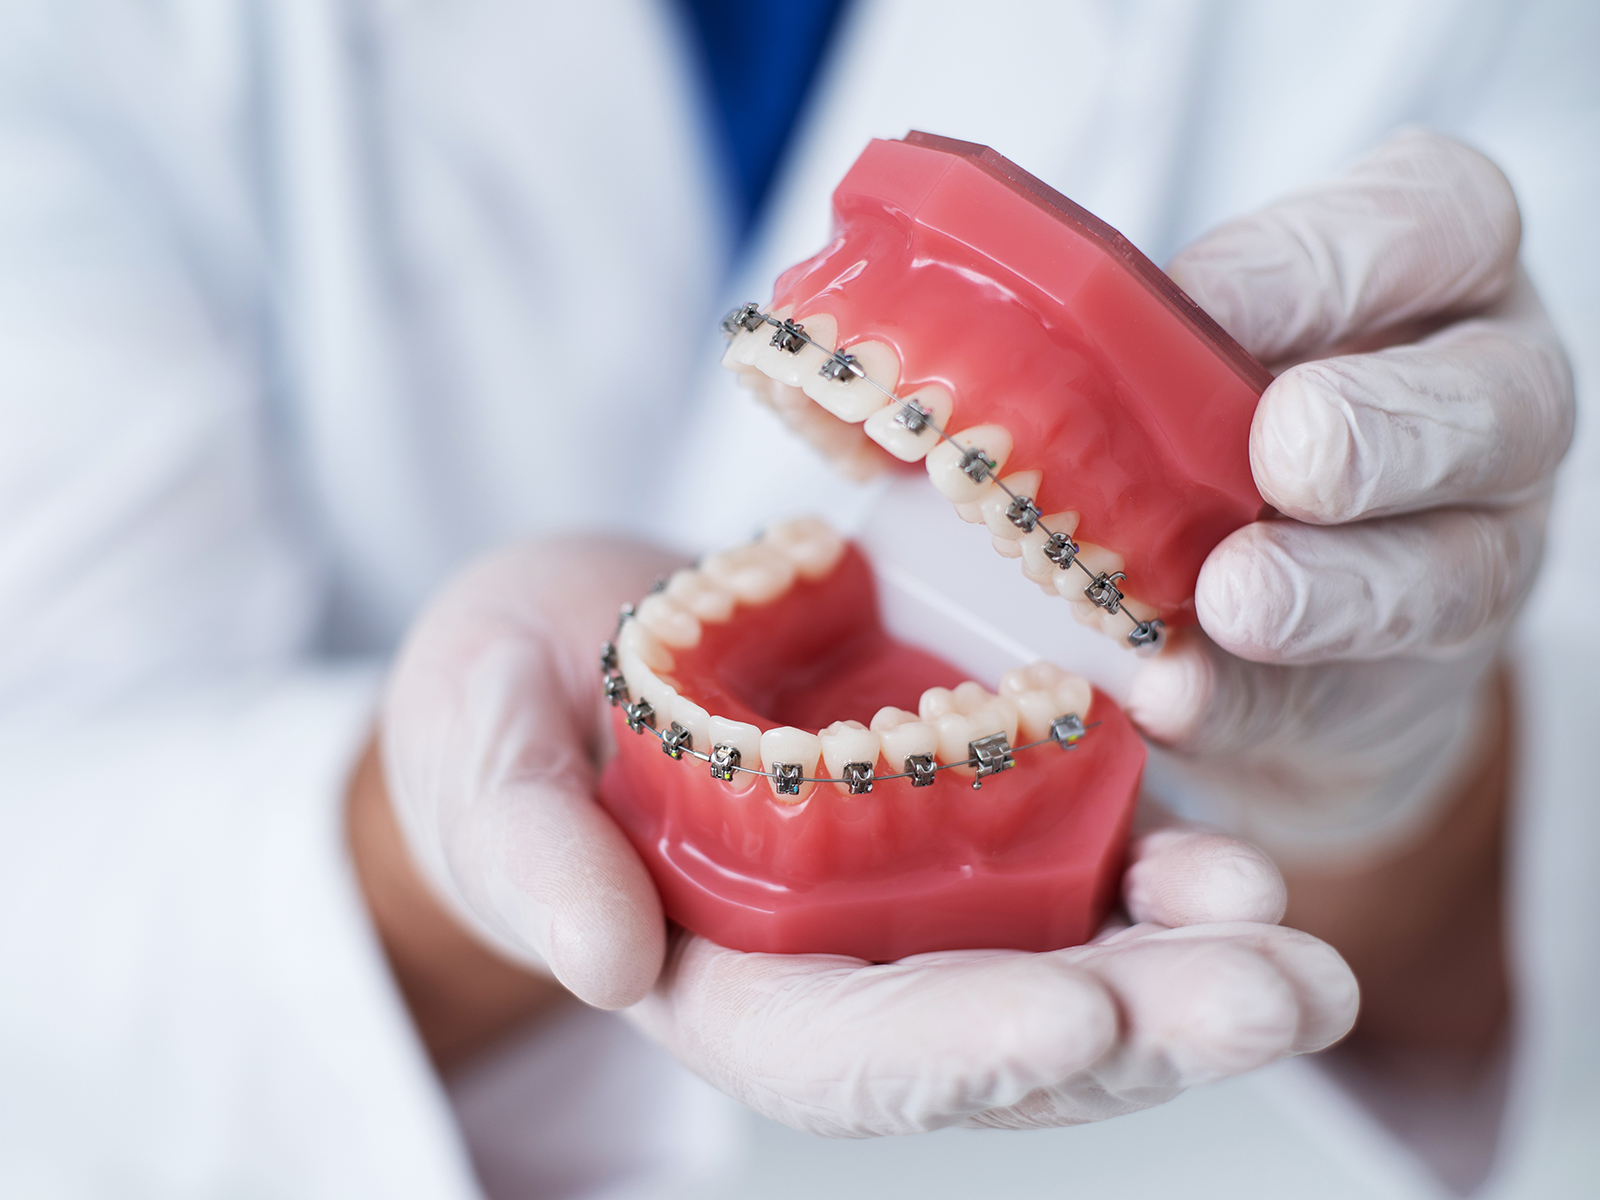 The Importance of Oral Hygiene During Orthodontic Treatment